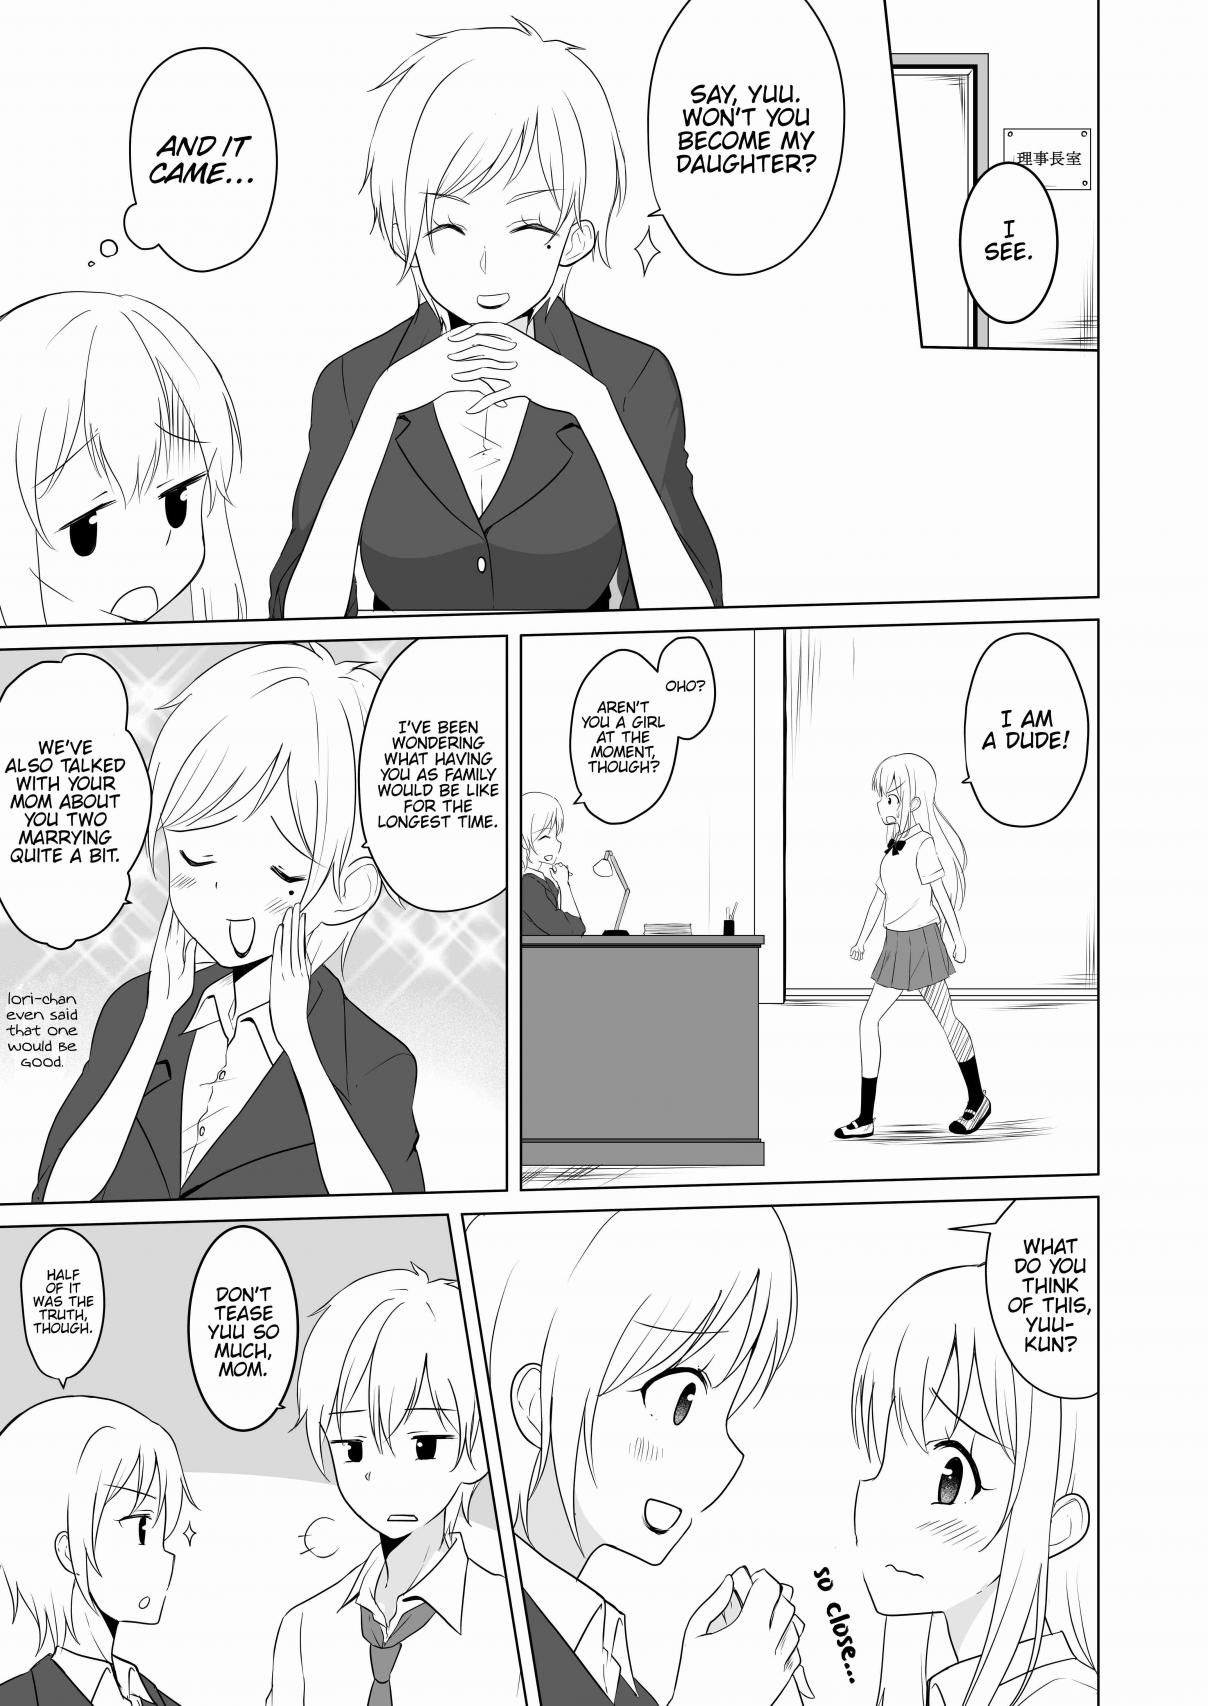 A Boy who Loves Genderswap got Genderswapped so He acts out His Ideal Genderswap Girl Ch. 11